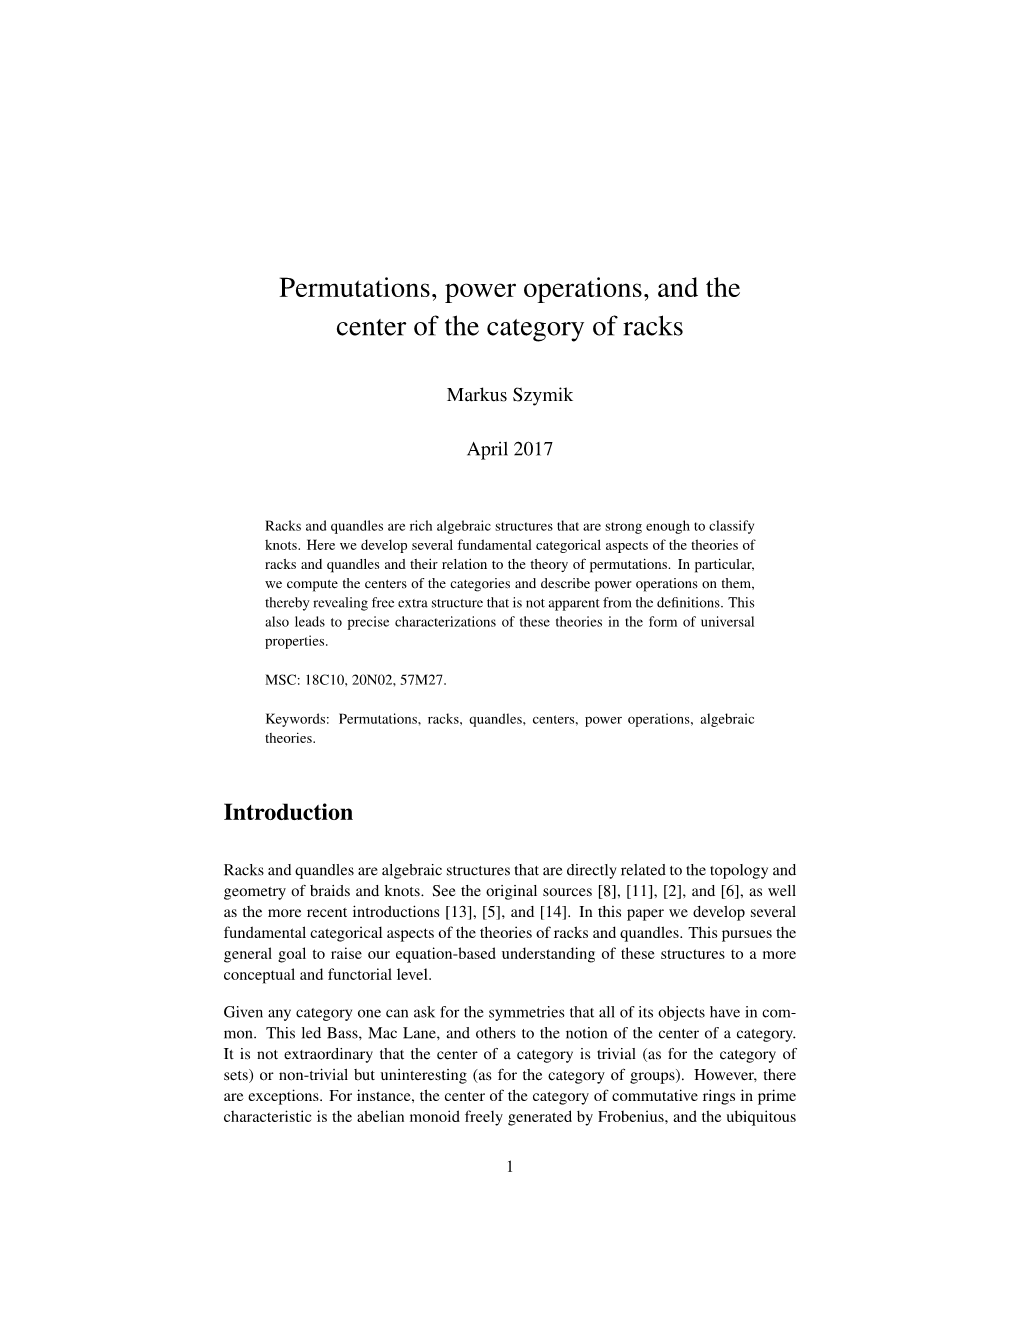 Permutations, Power Operations, and the Center of the Category of Racks